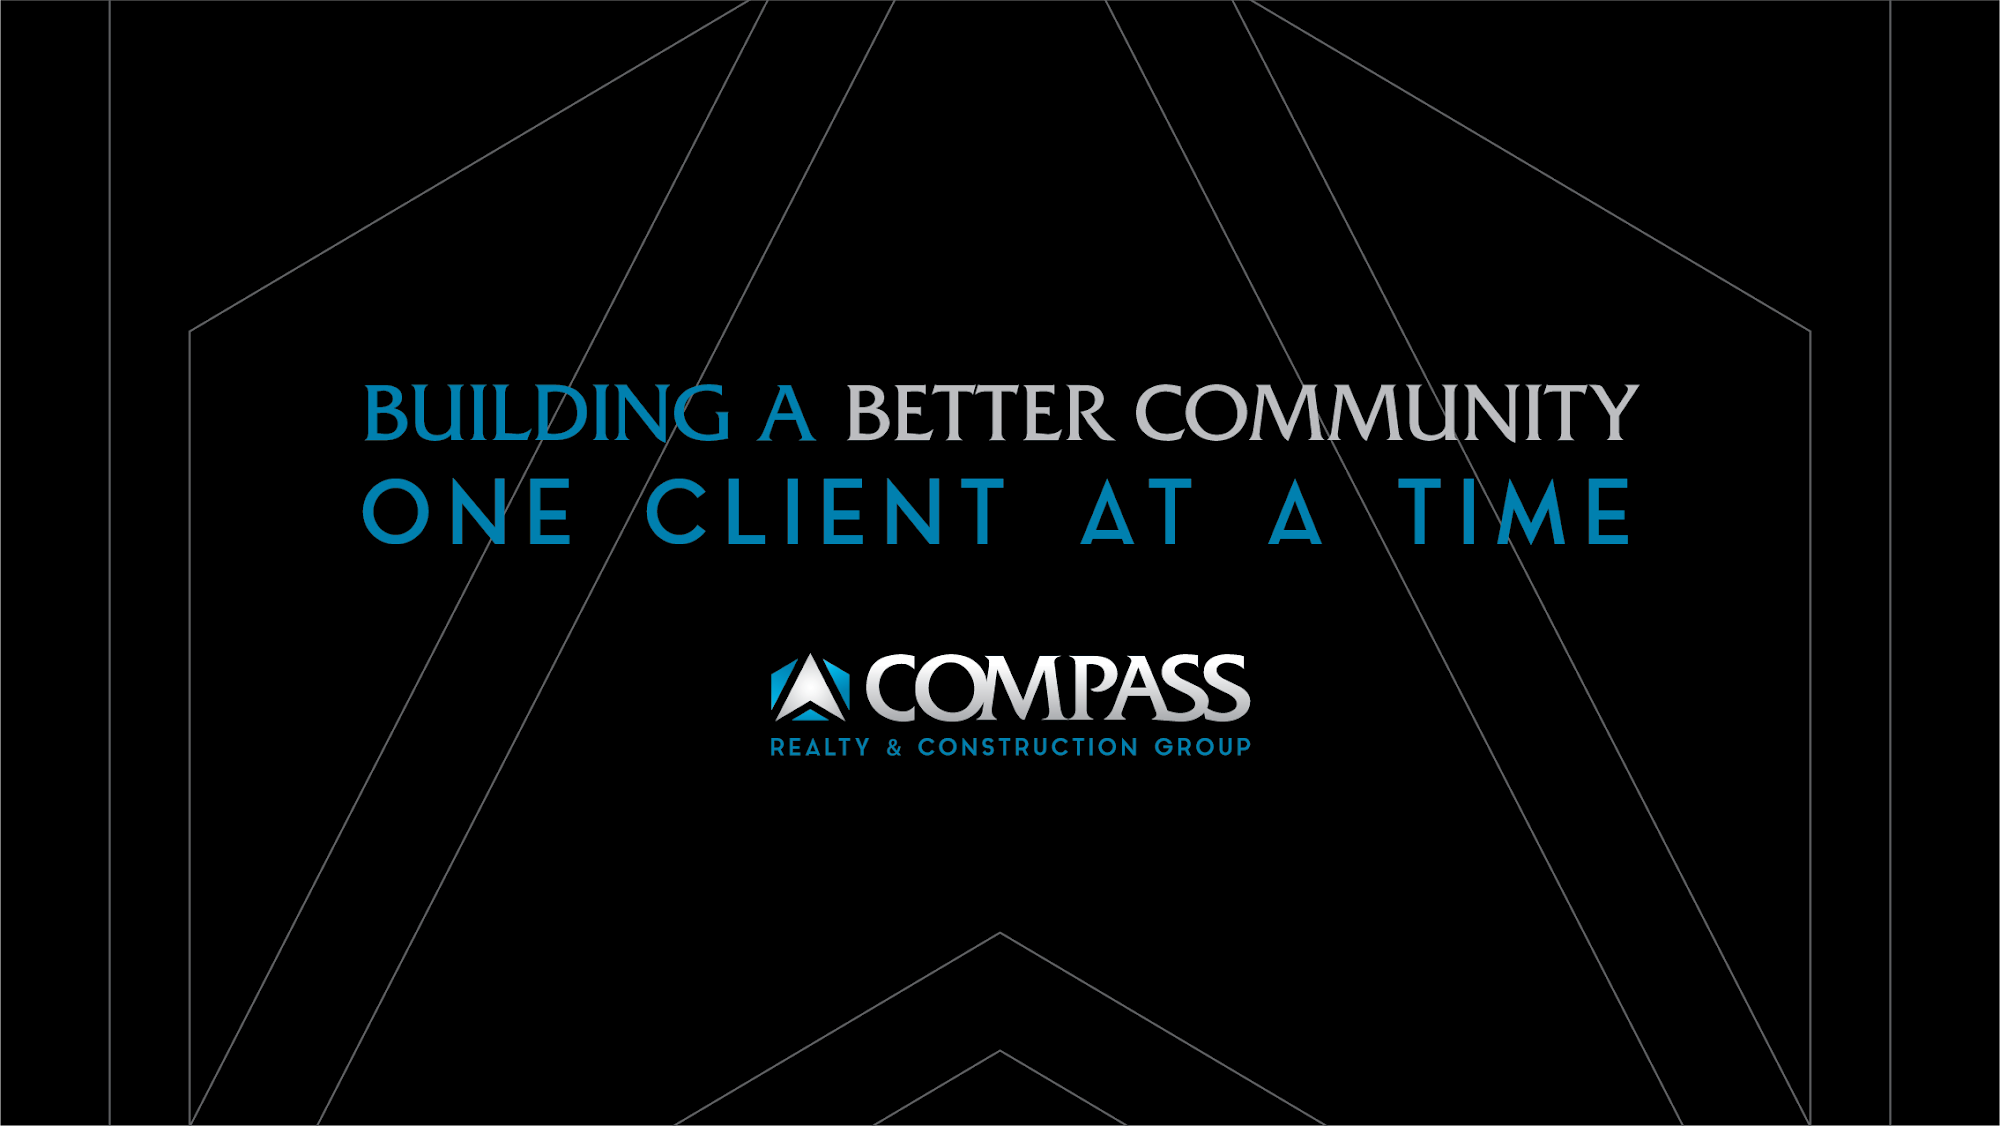 Compass Realty & Construction Group